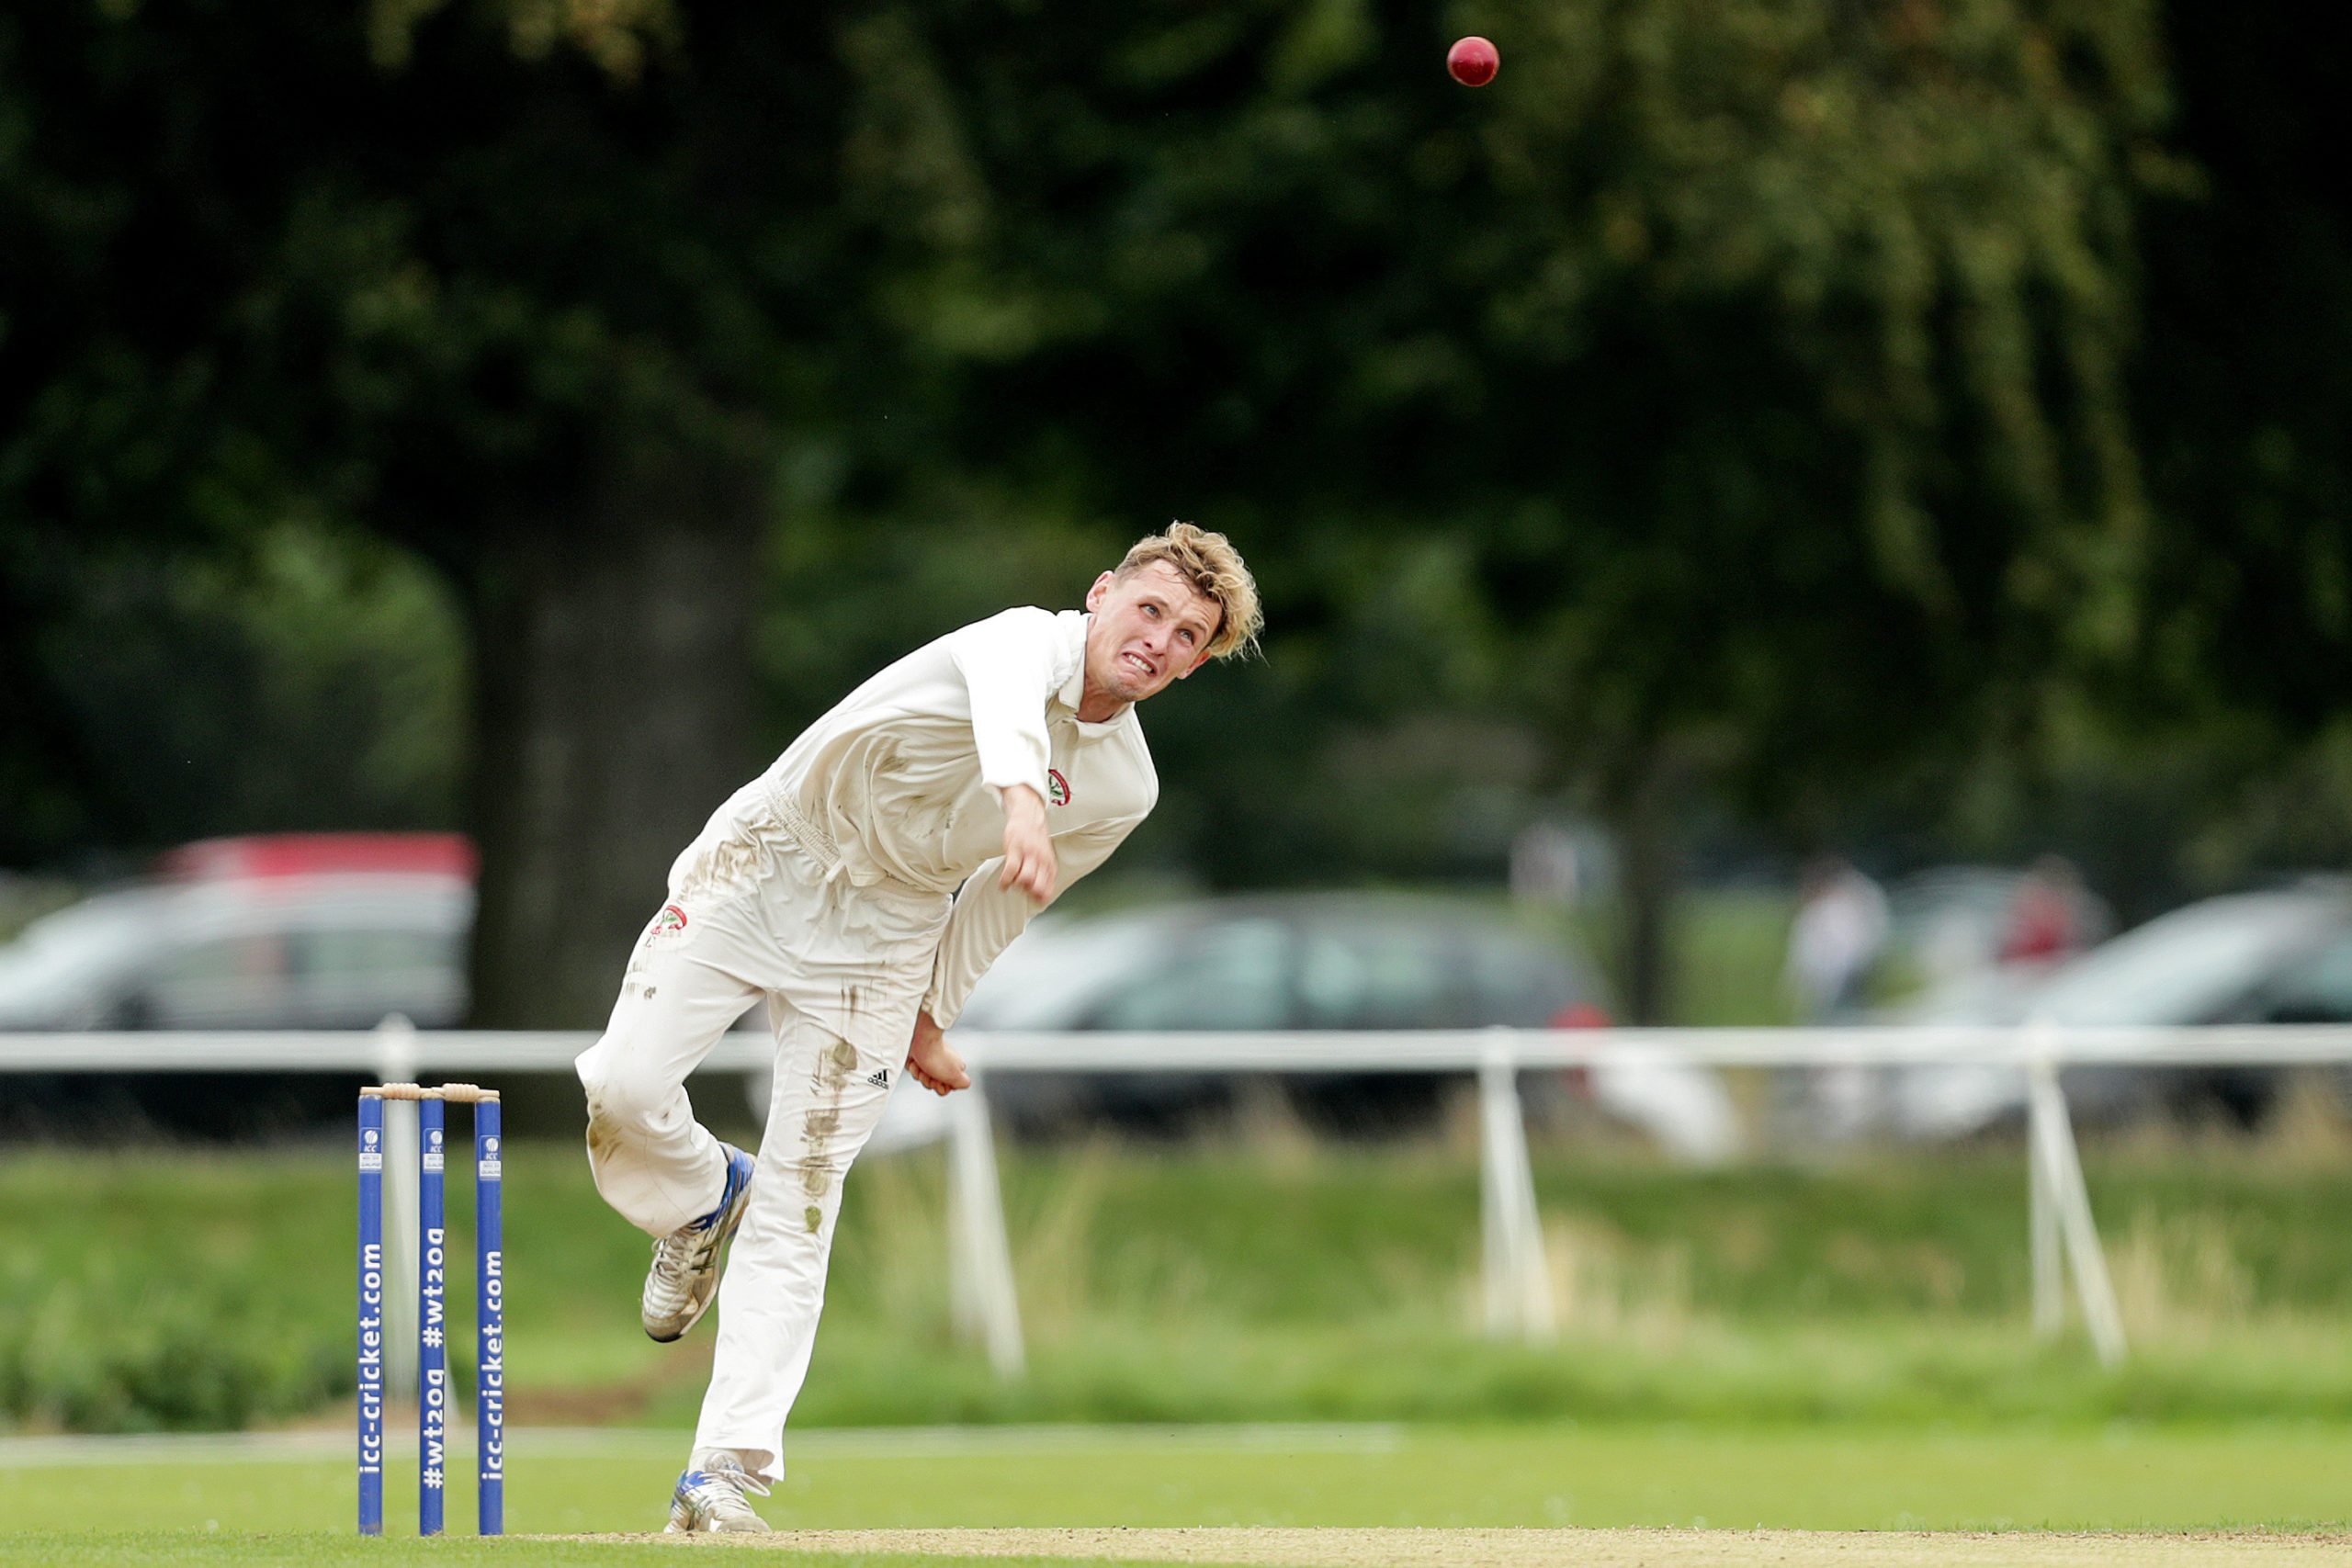 Cricket Ireland: Interview - Ben White looking to learn on Ireland Wolves’ Bangladesh tour